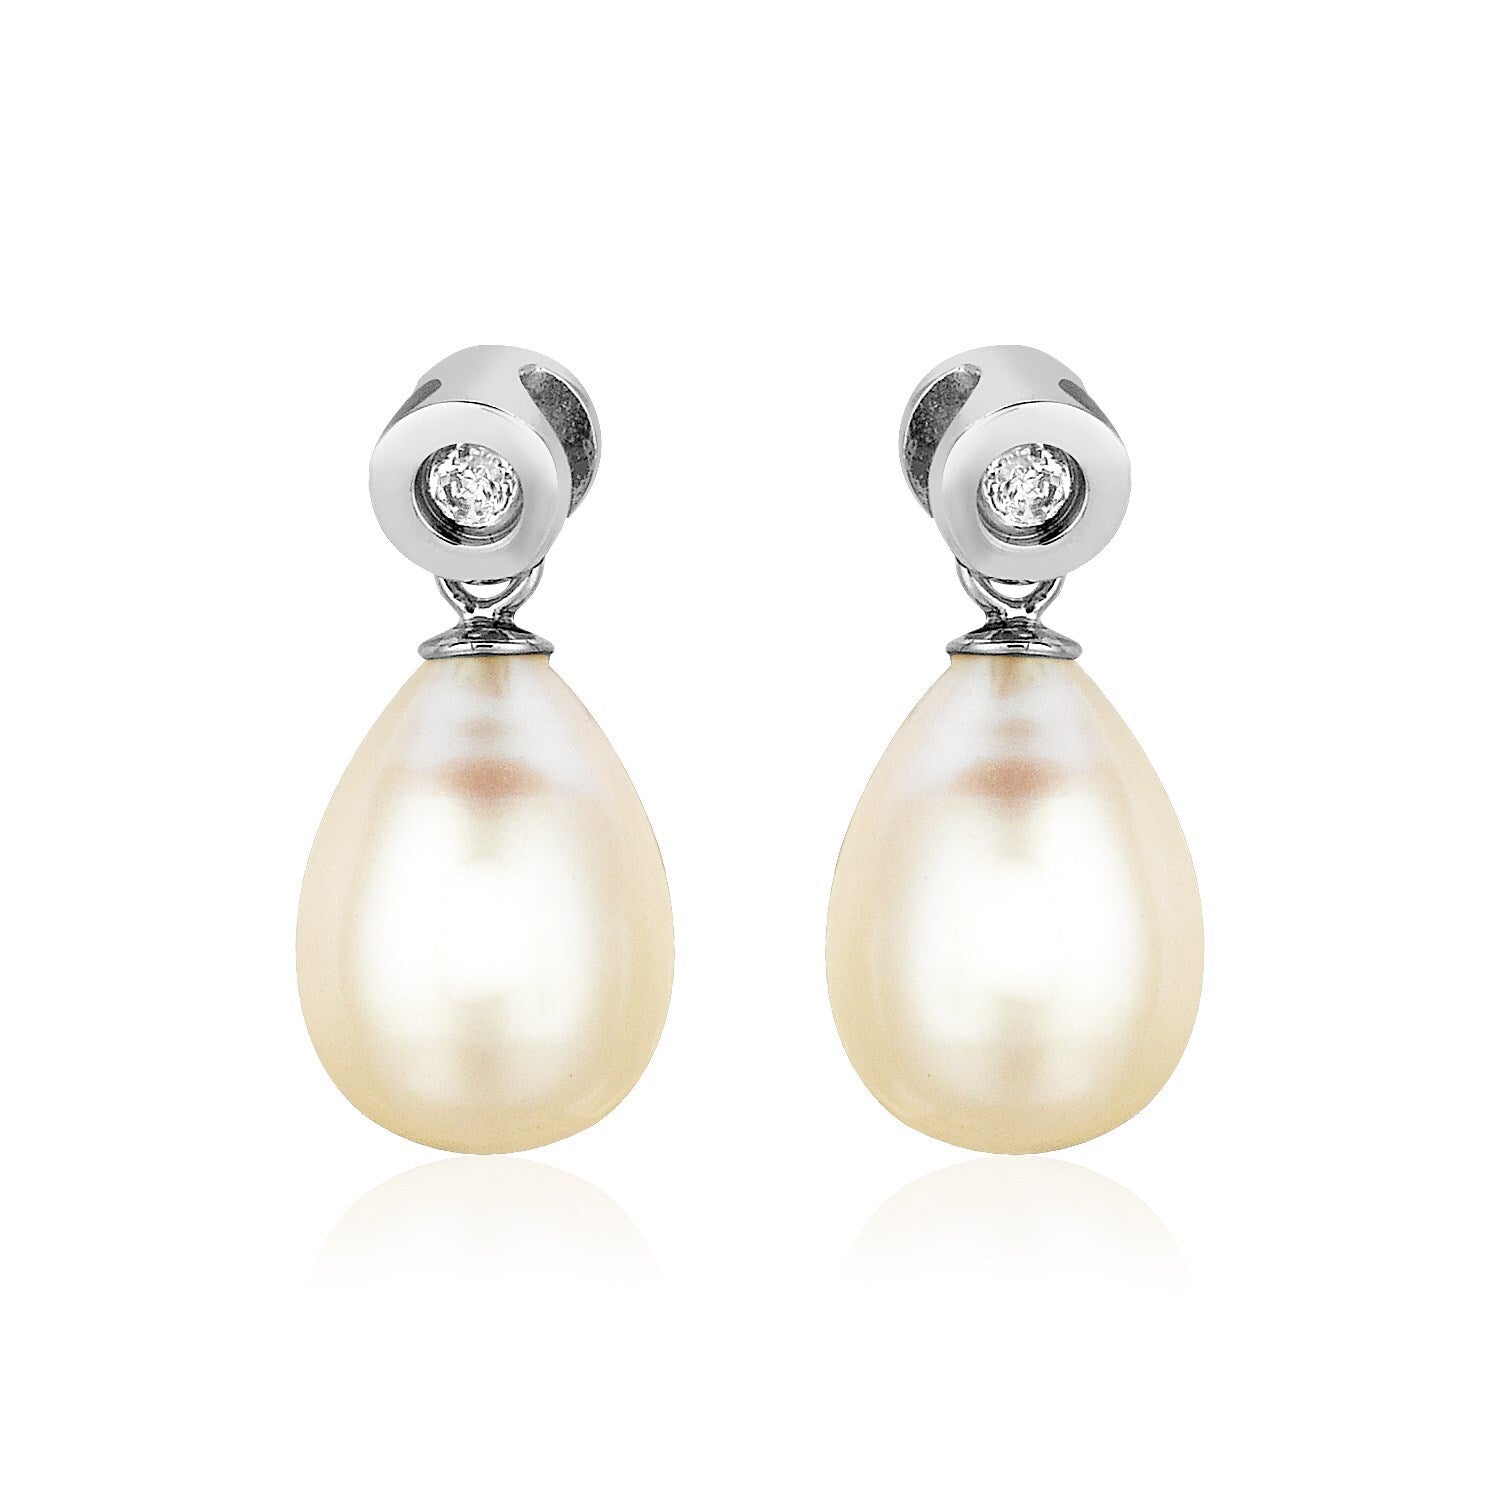 Sterling Silver Earrings with Pear Shaped Freshwater Pearls and Cubic Zirconias